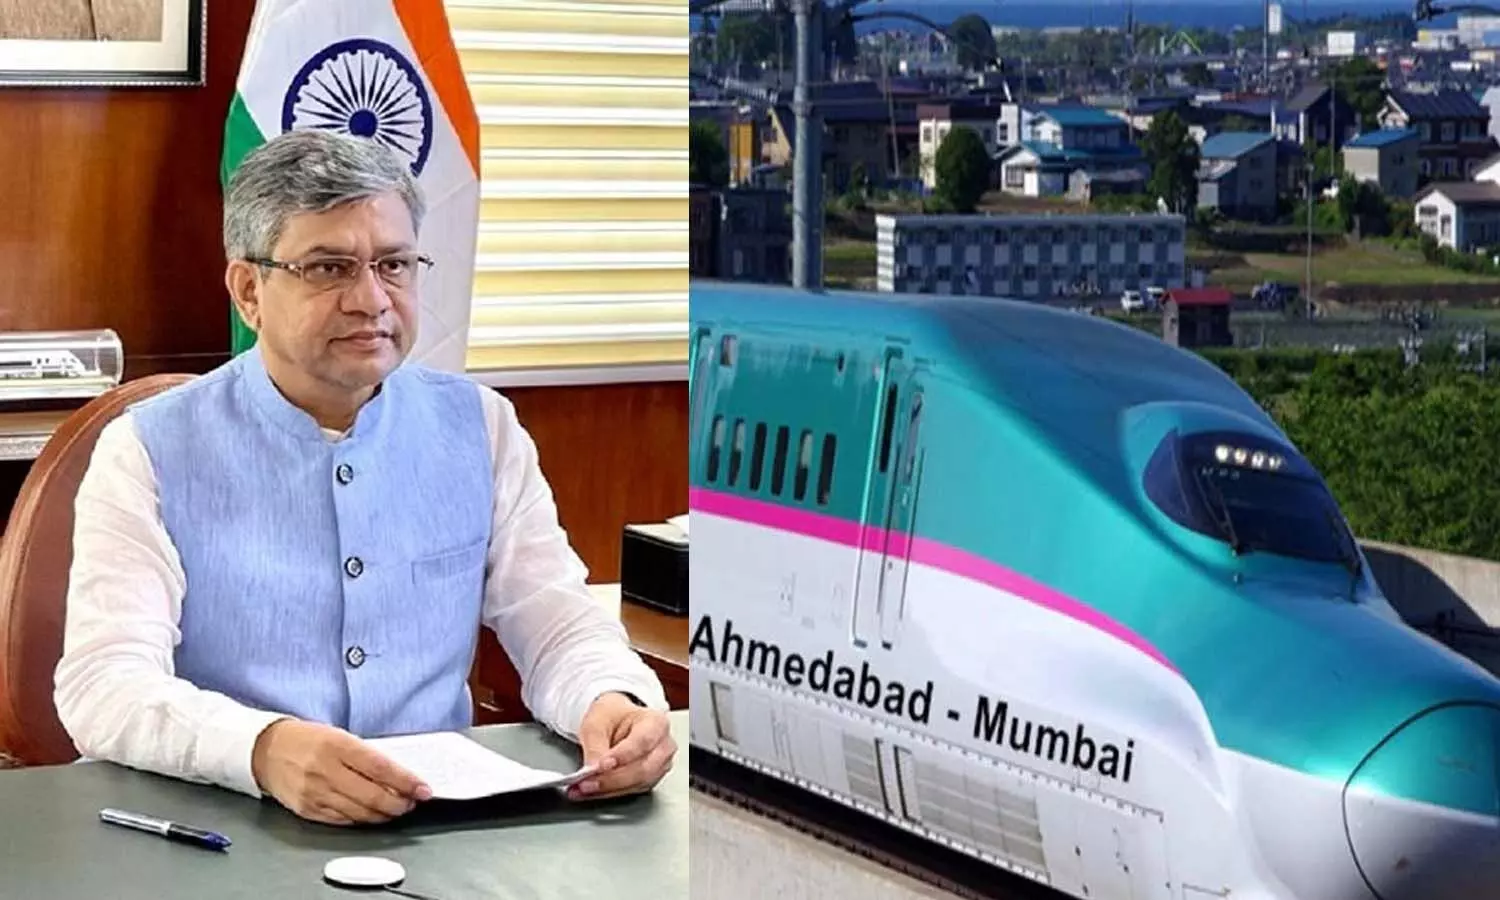 Mumbai-Ahmedabad bullet train fare almost fixed, know how much will the journey cost, the government indicated